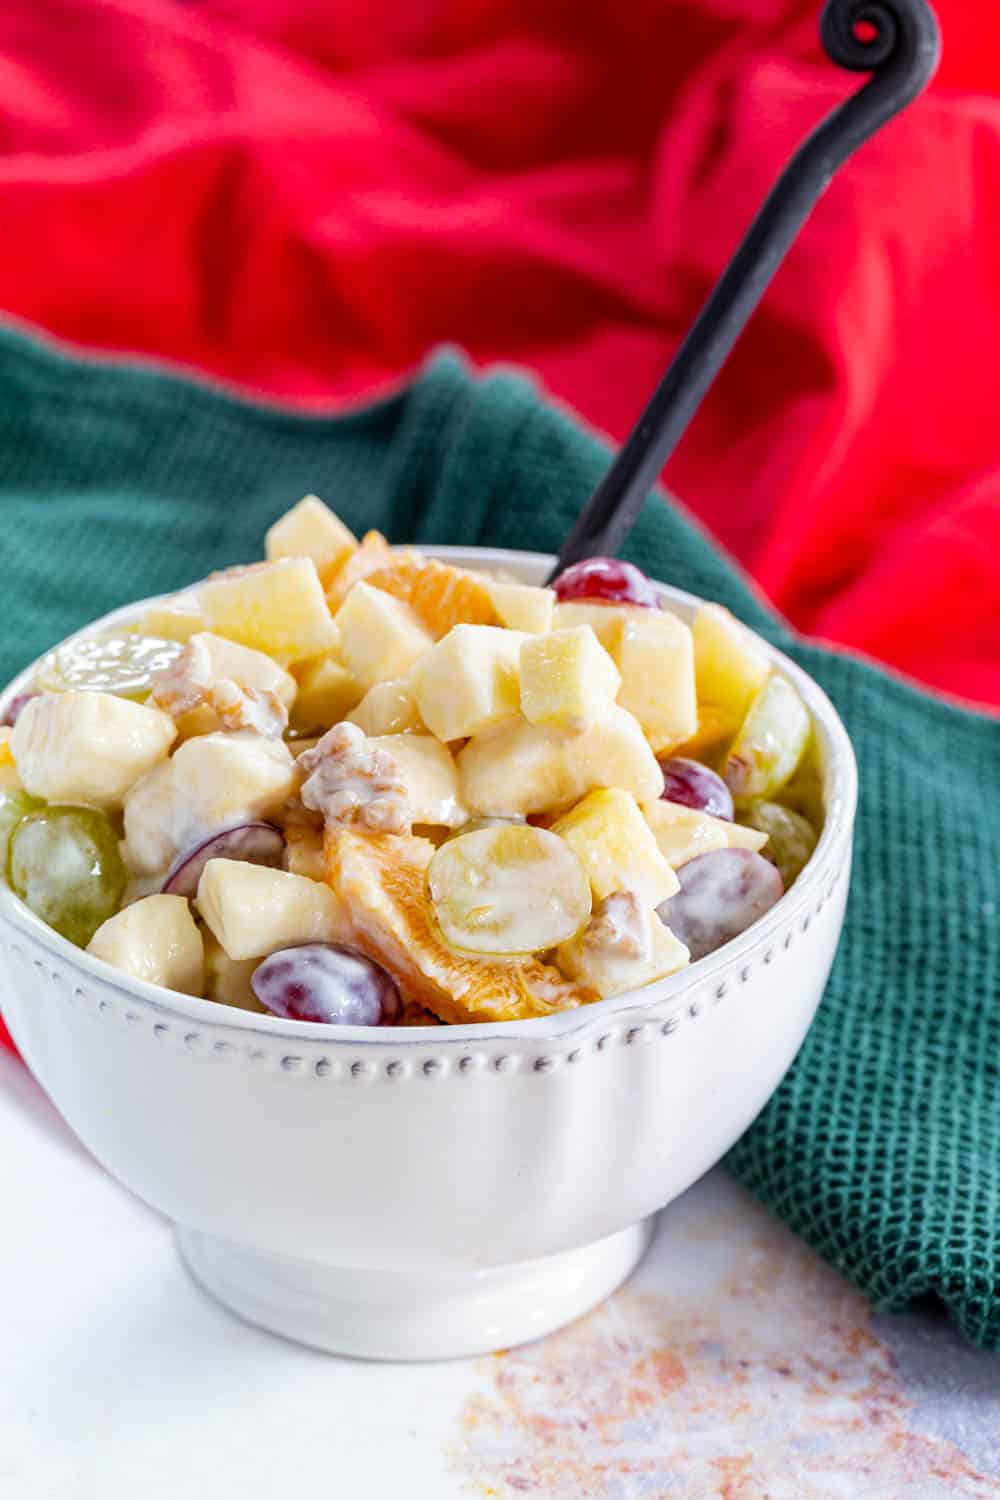 Waldorf Fruit Salad is one of the best salad recipes